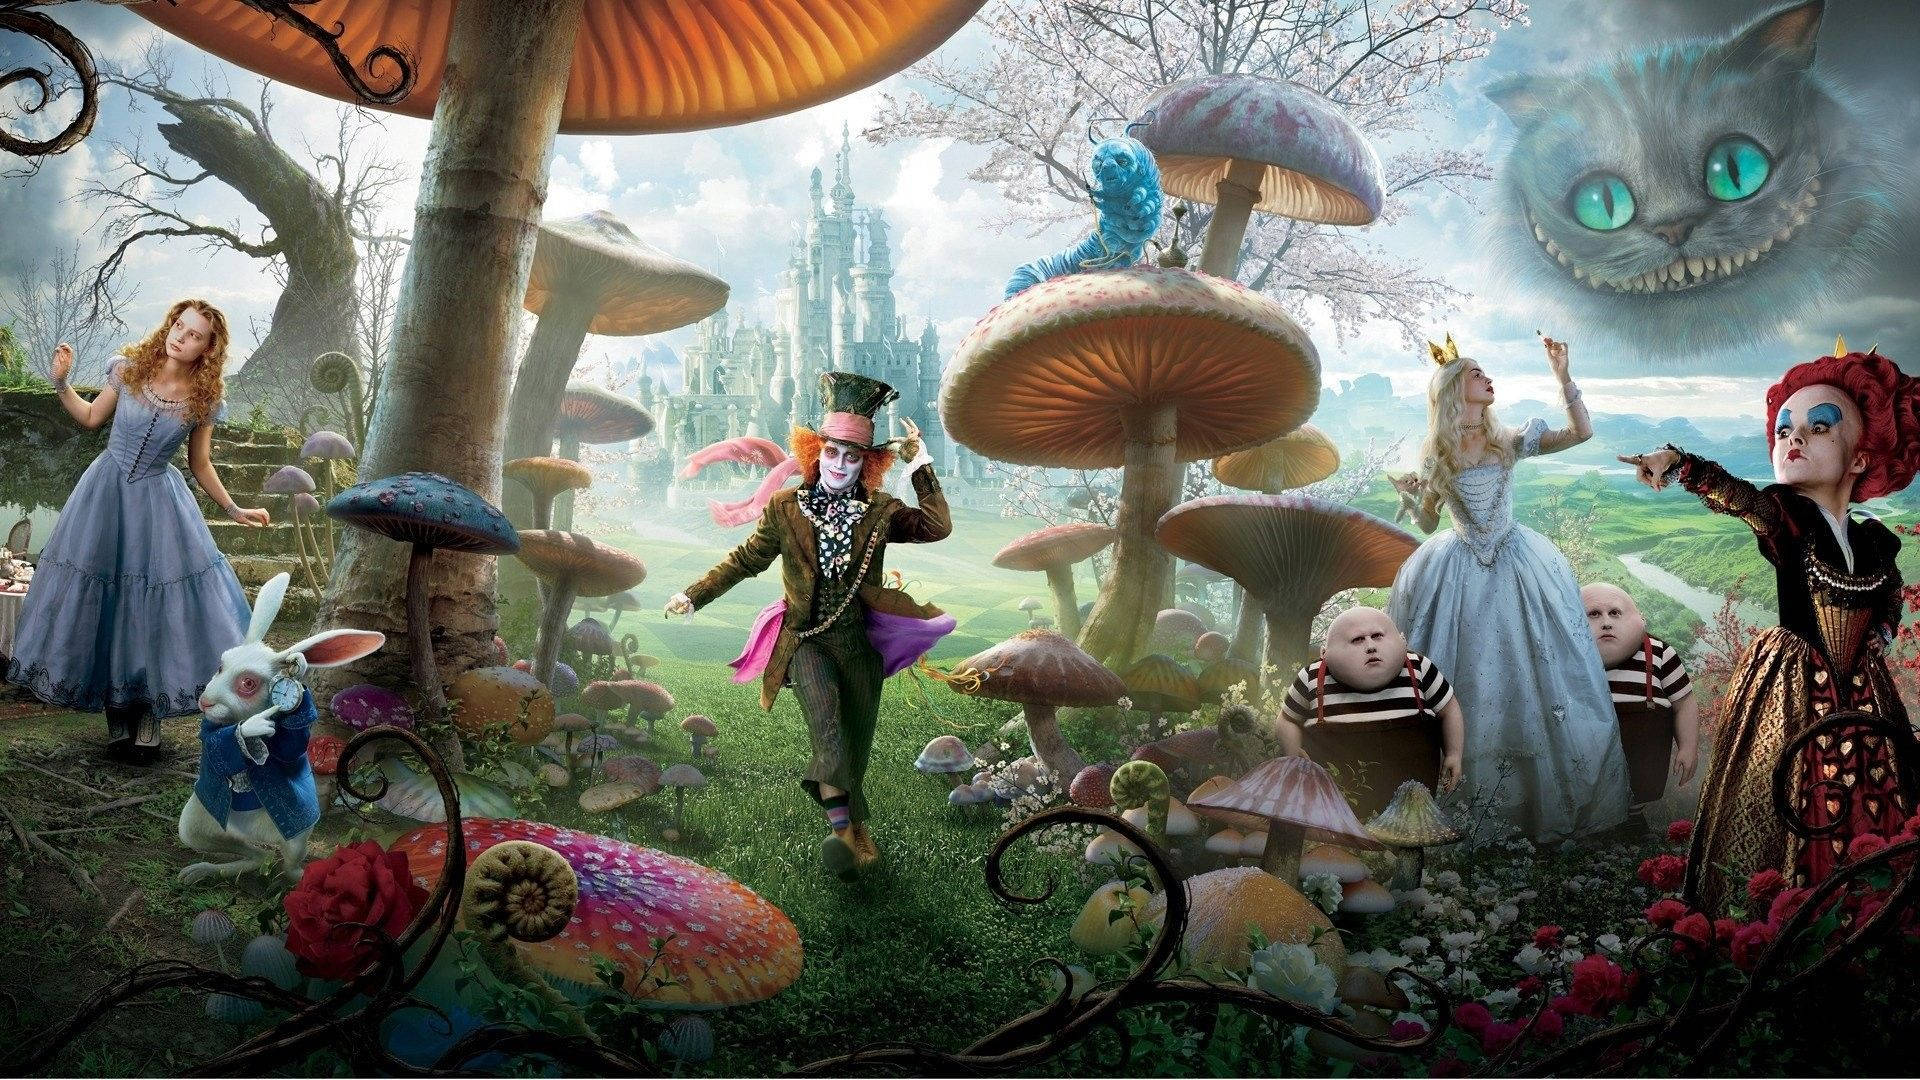 Alice in her blue dress along with the characters from Alice in Wonderland - 2010 film Wallpaper